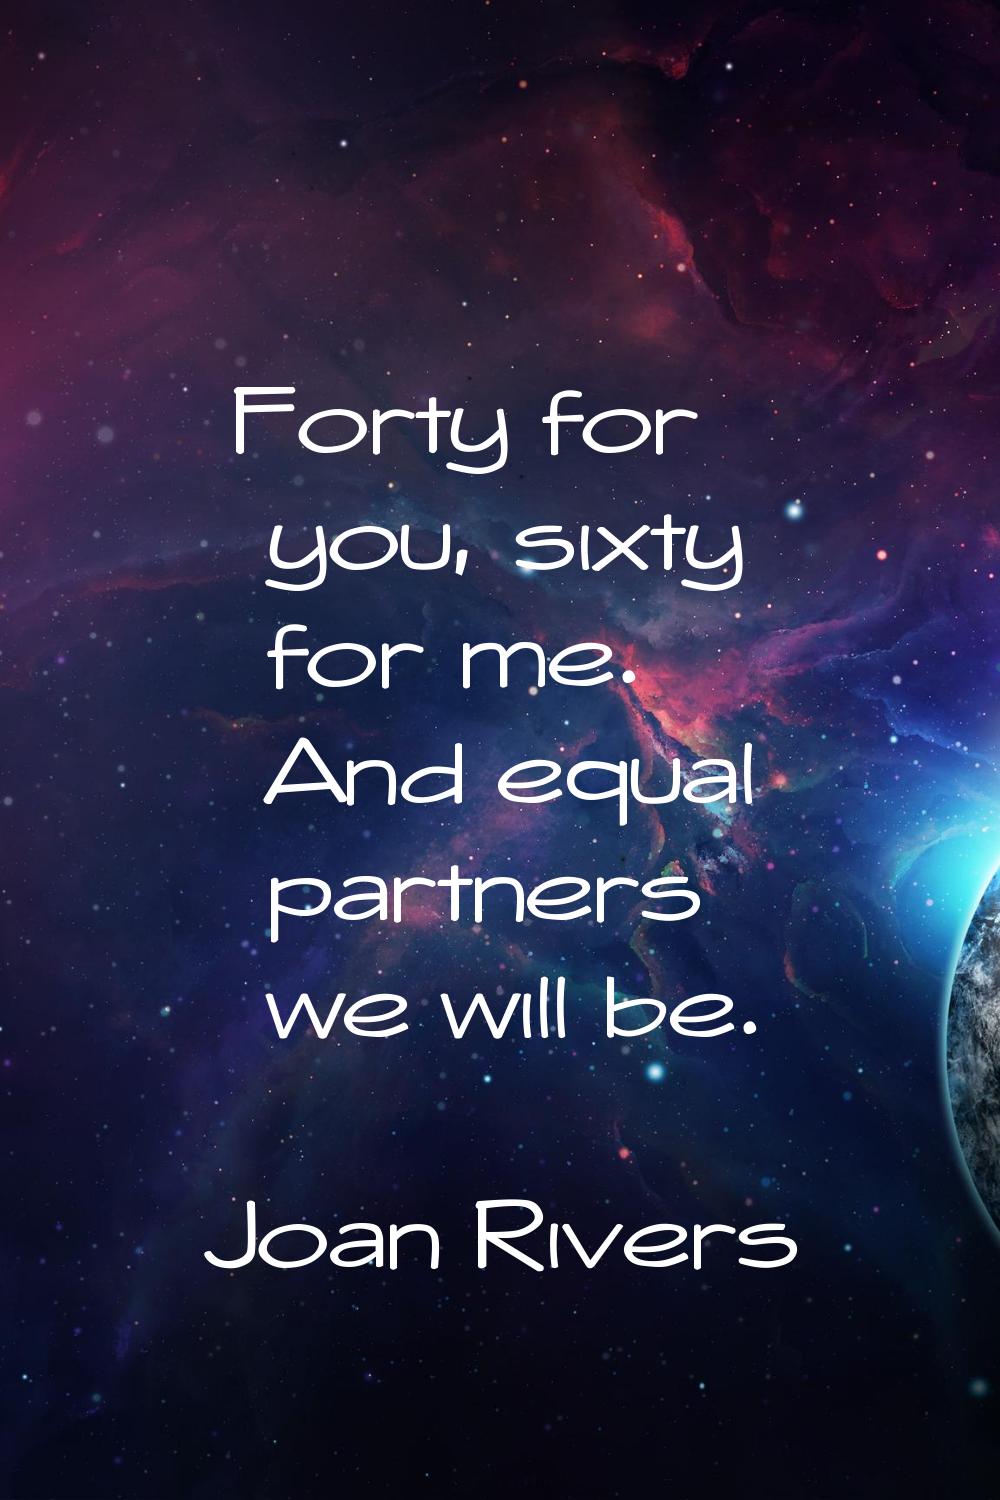 Forty for you, sixty for me. And equal partners we will be.